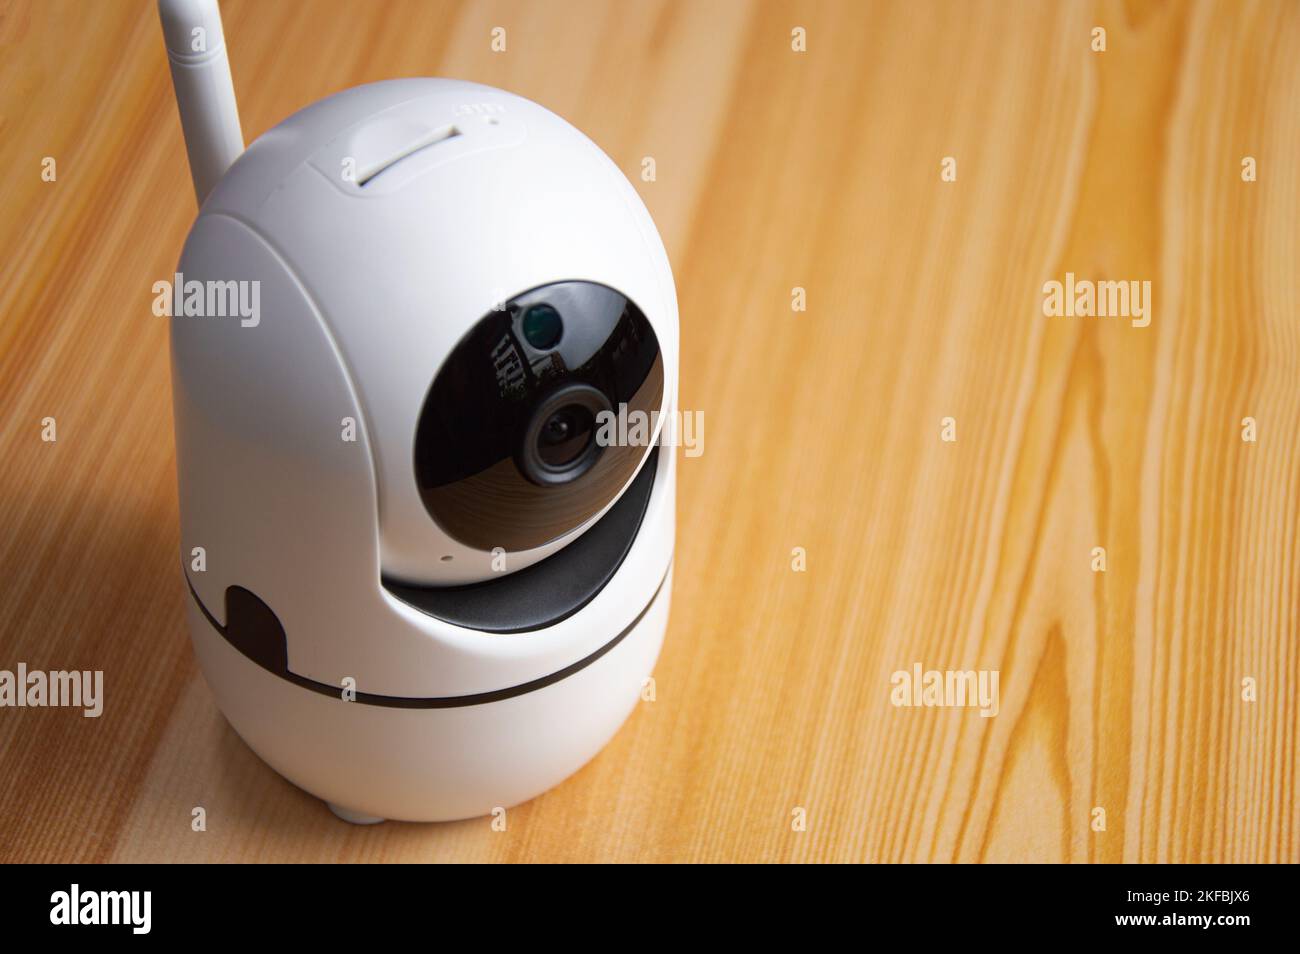 White IP camera placed on wooden floor Stock Photo